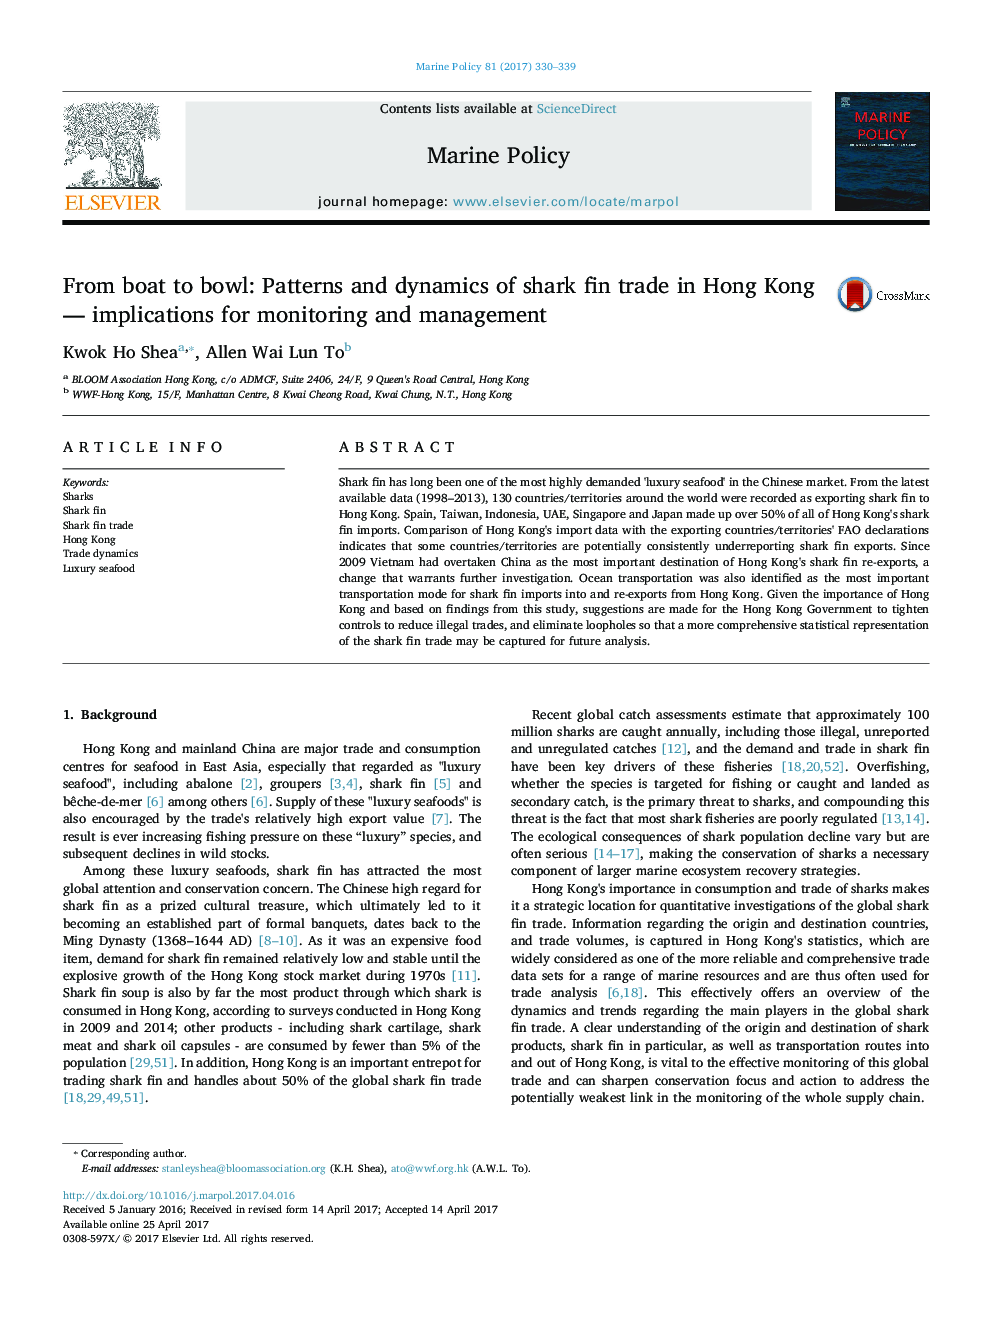 From boat to bowl: Patterns and dynamics of shark fin trade in Hong Kong â implications for monitoring and management